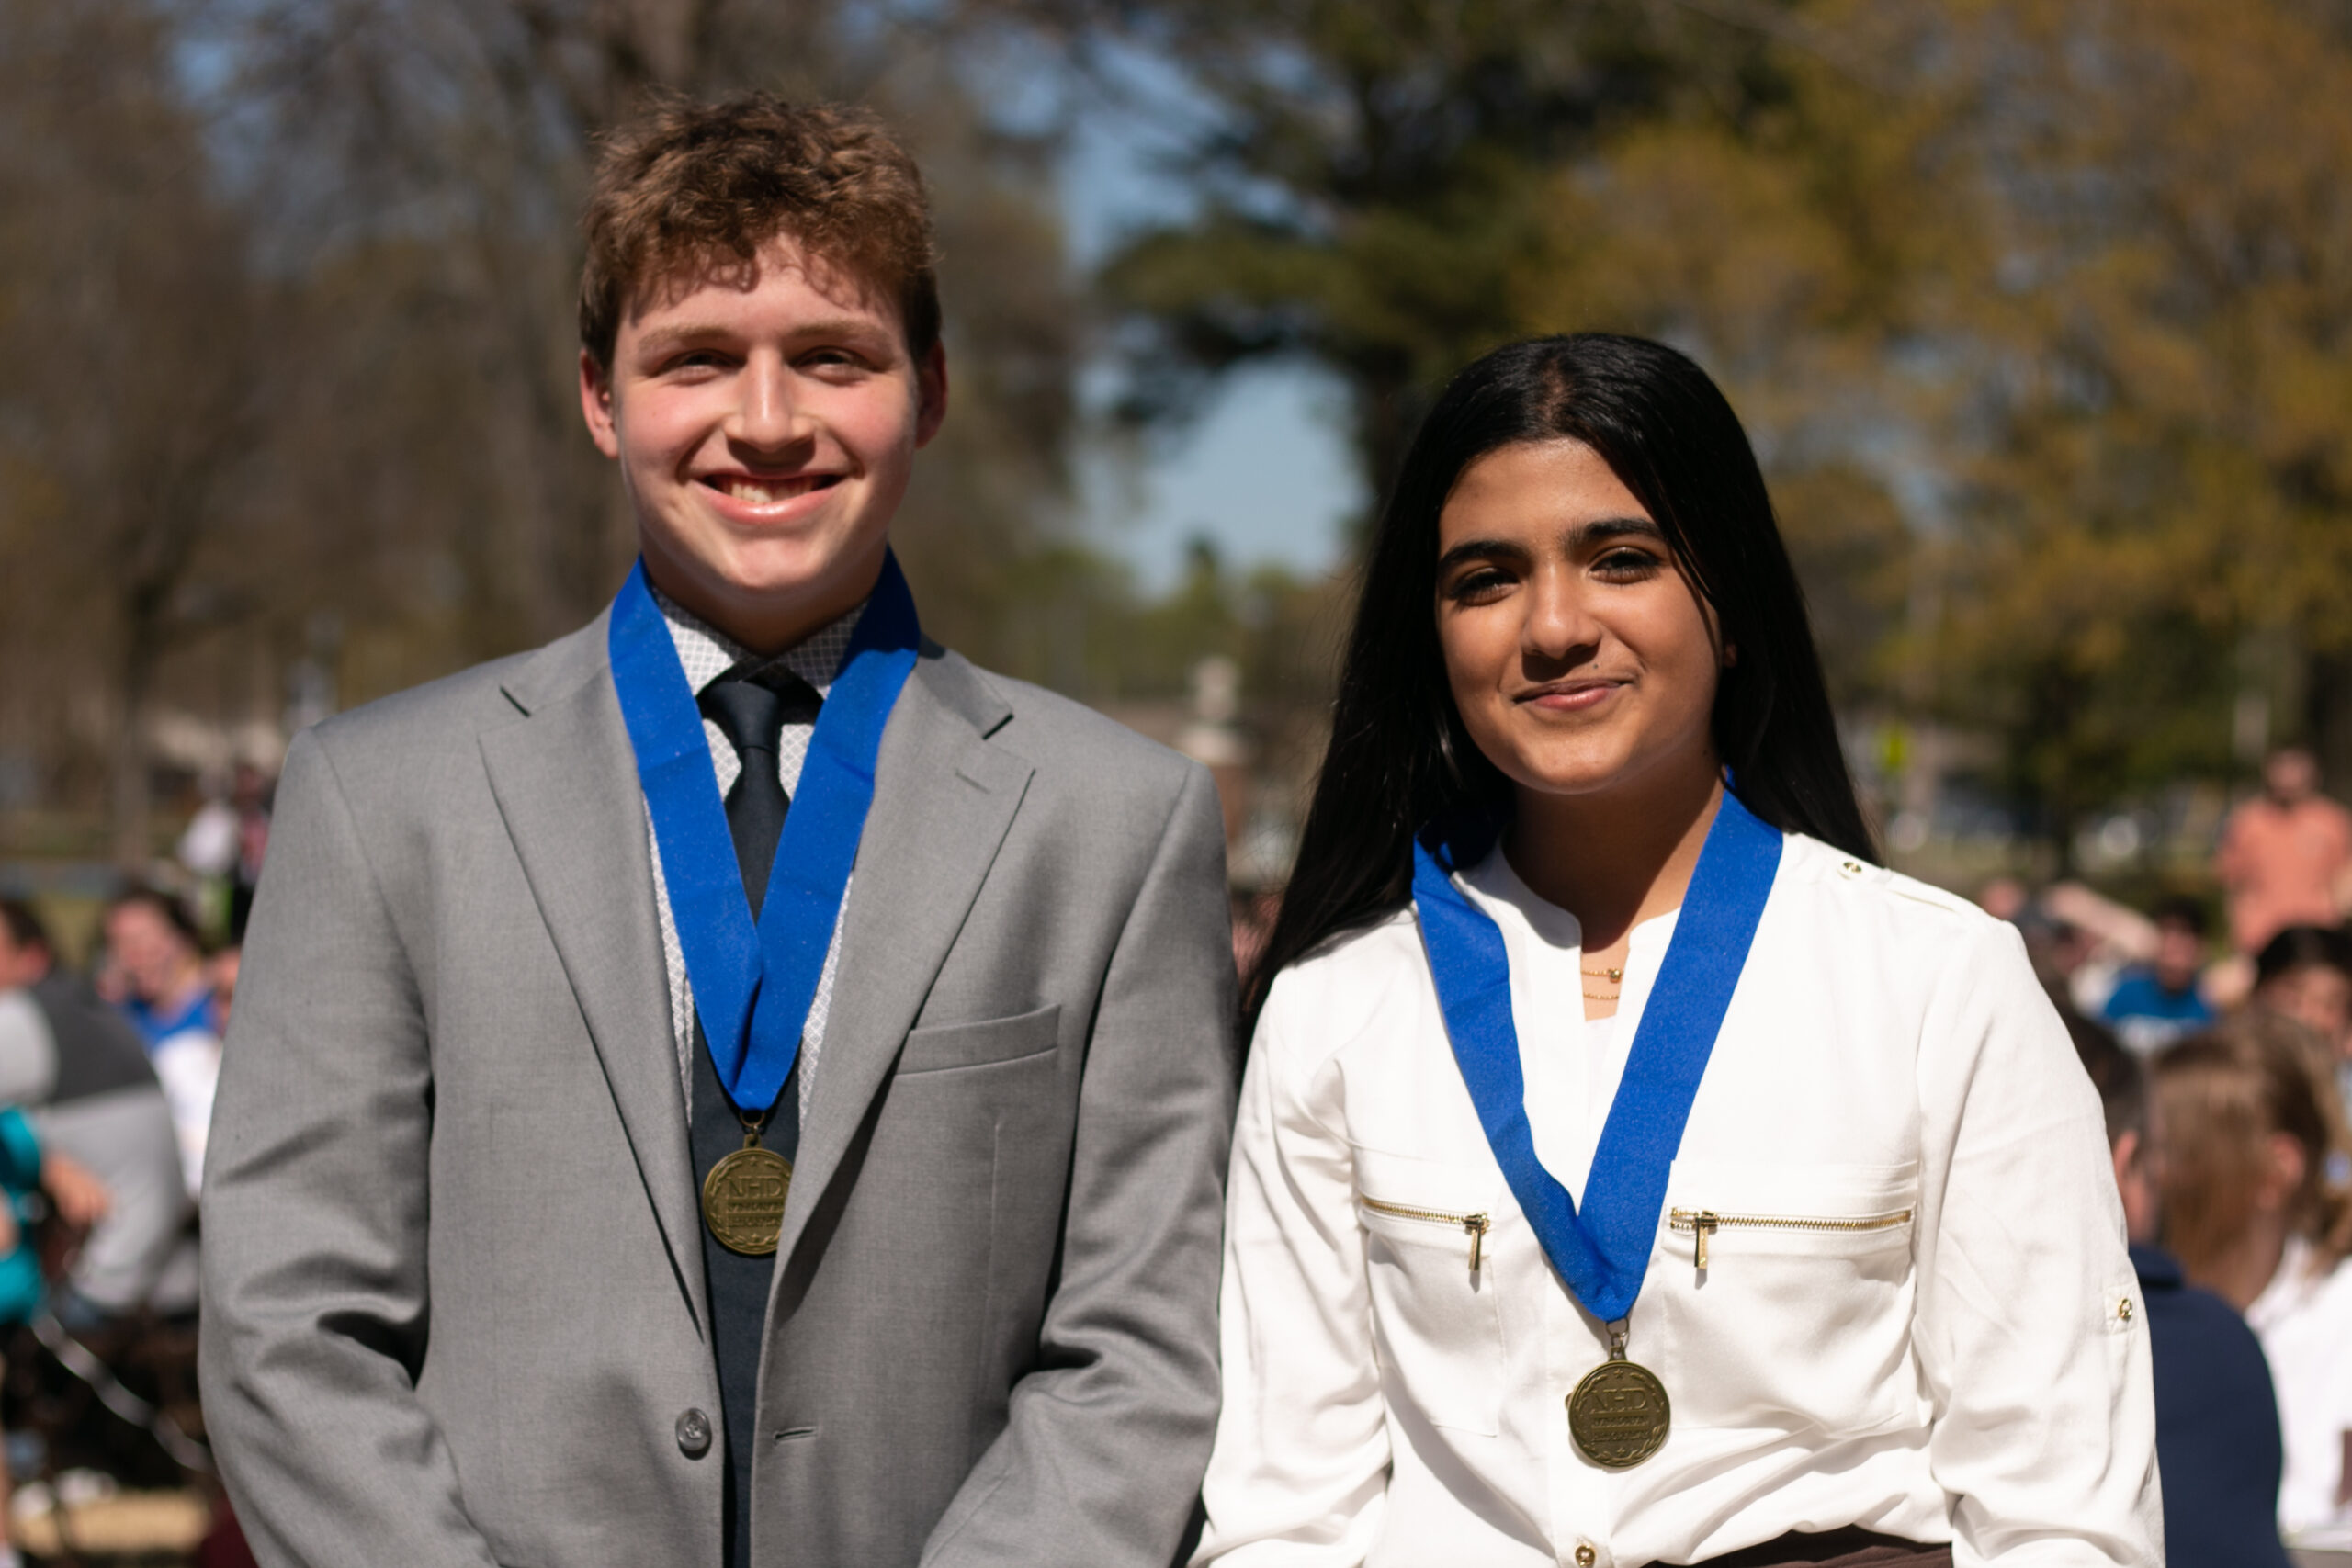 Two students pose for a picture wearing first-place medals